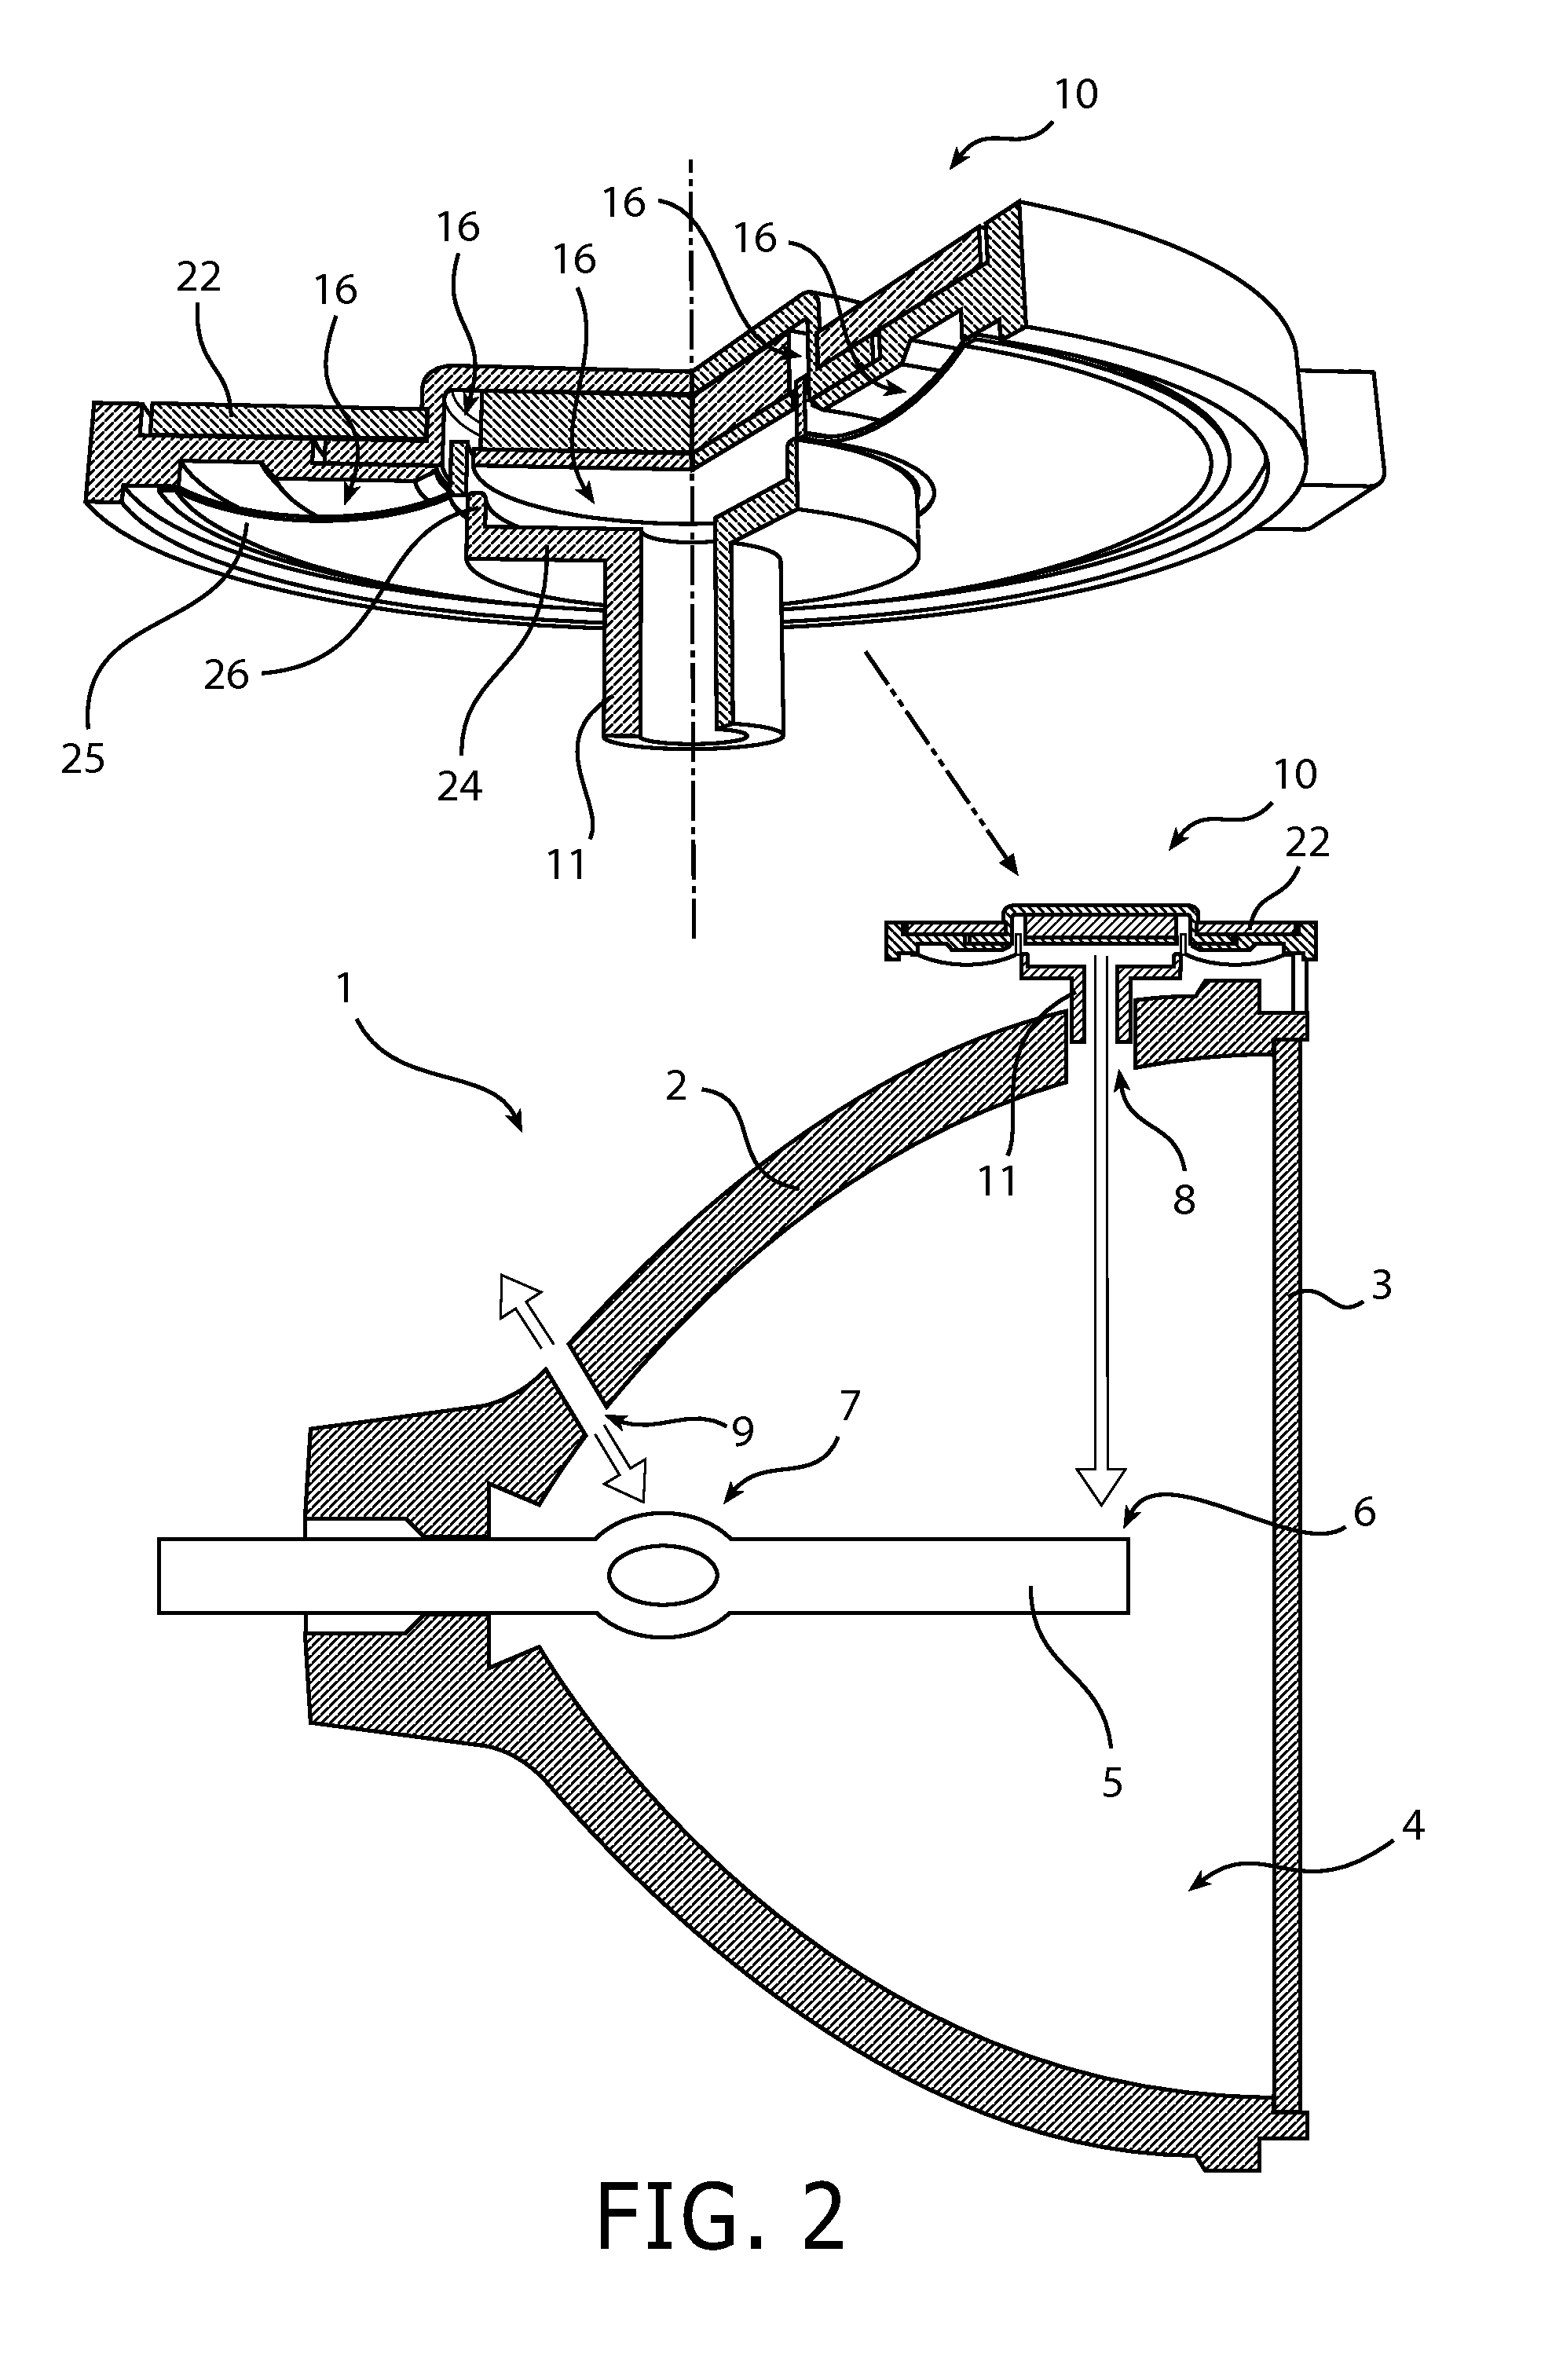 Cooling device utilizing internal synthetic jets